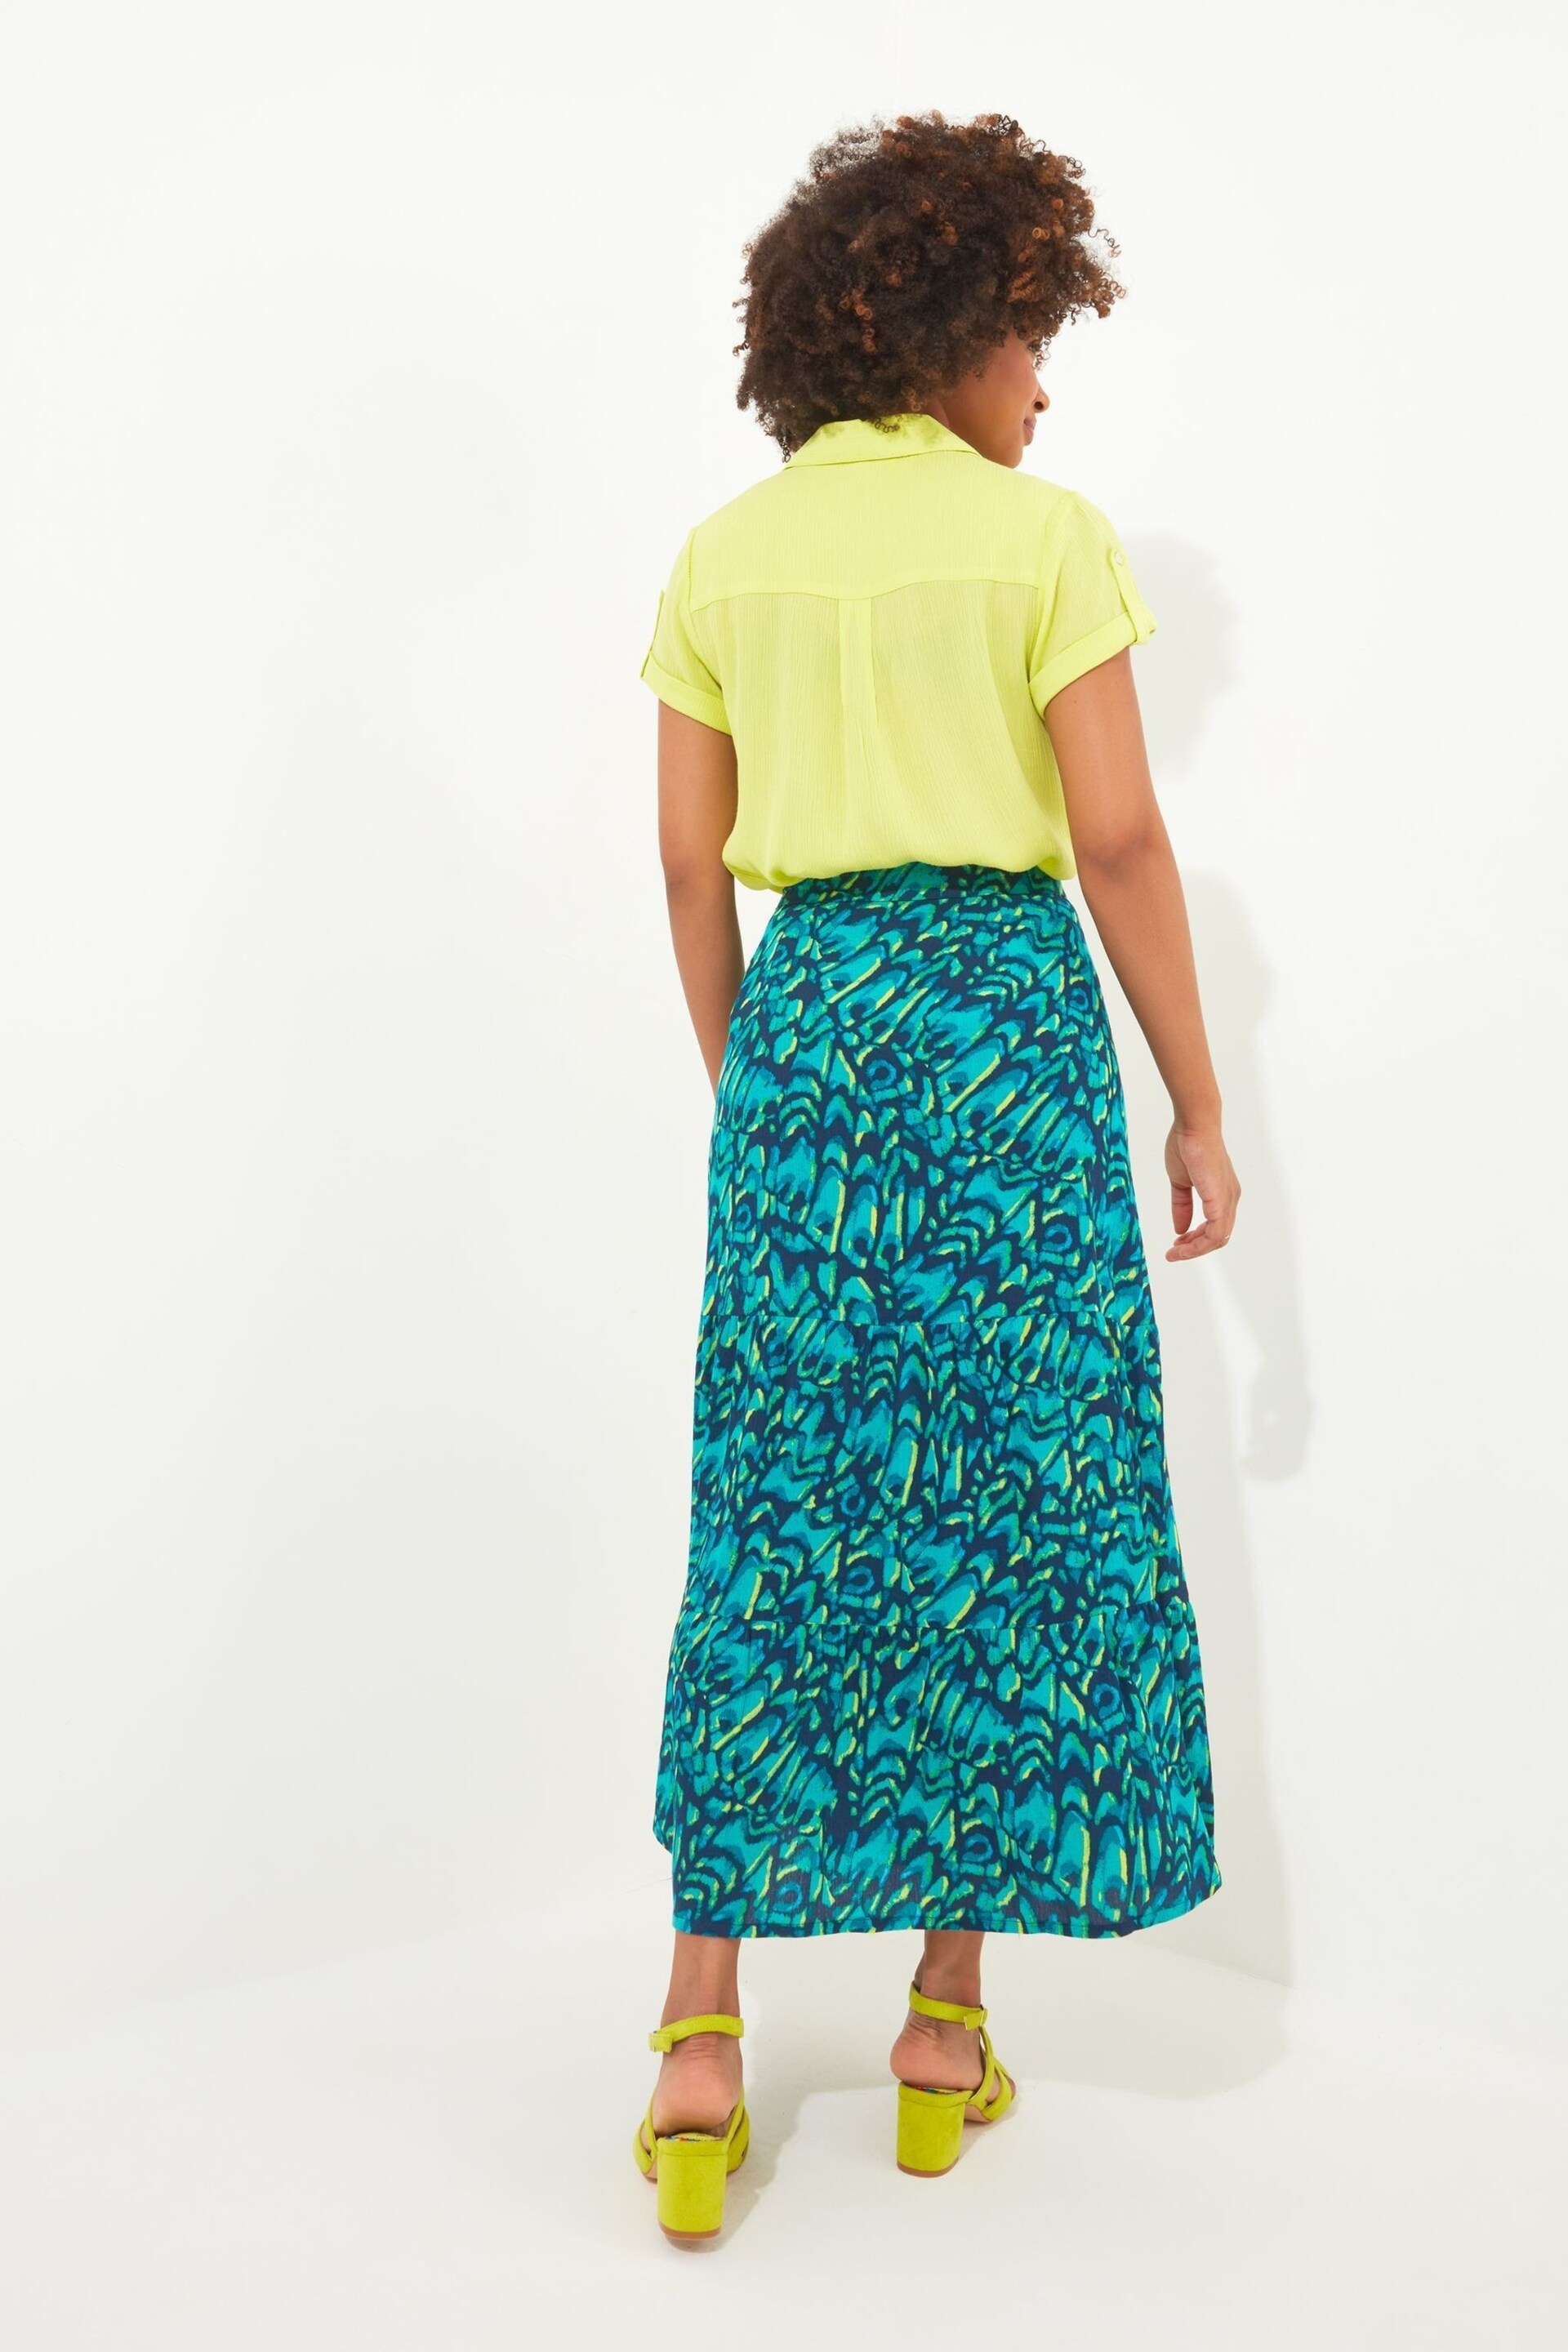 Joe Browns Blue Abstract Butterfly Maxi Skirt - Image 2 of 5